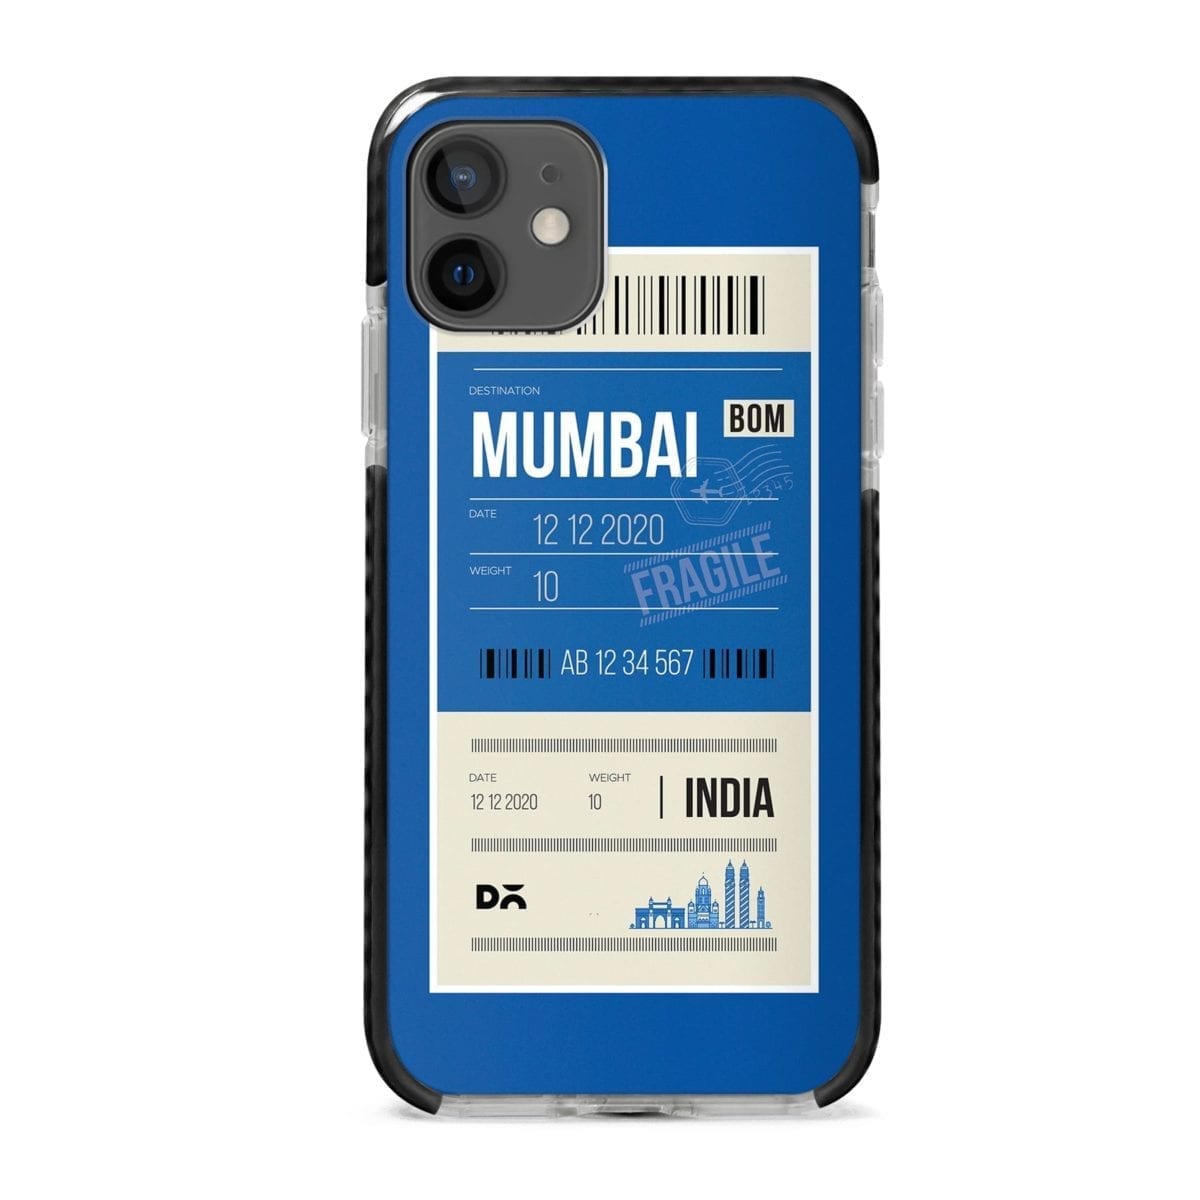 Mumbai City Tag Stride Case Cover for Apple iPhone 12 Mini and Apple iPhone 12 with great design and shock proof | Klippik | Online Shopping | Kuwait UAE Saudi